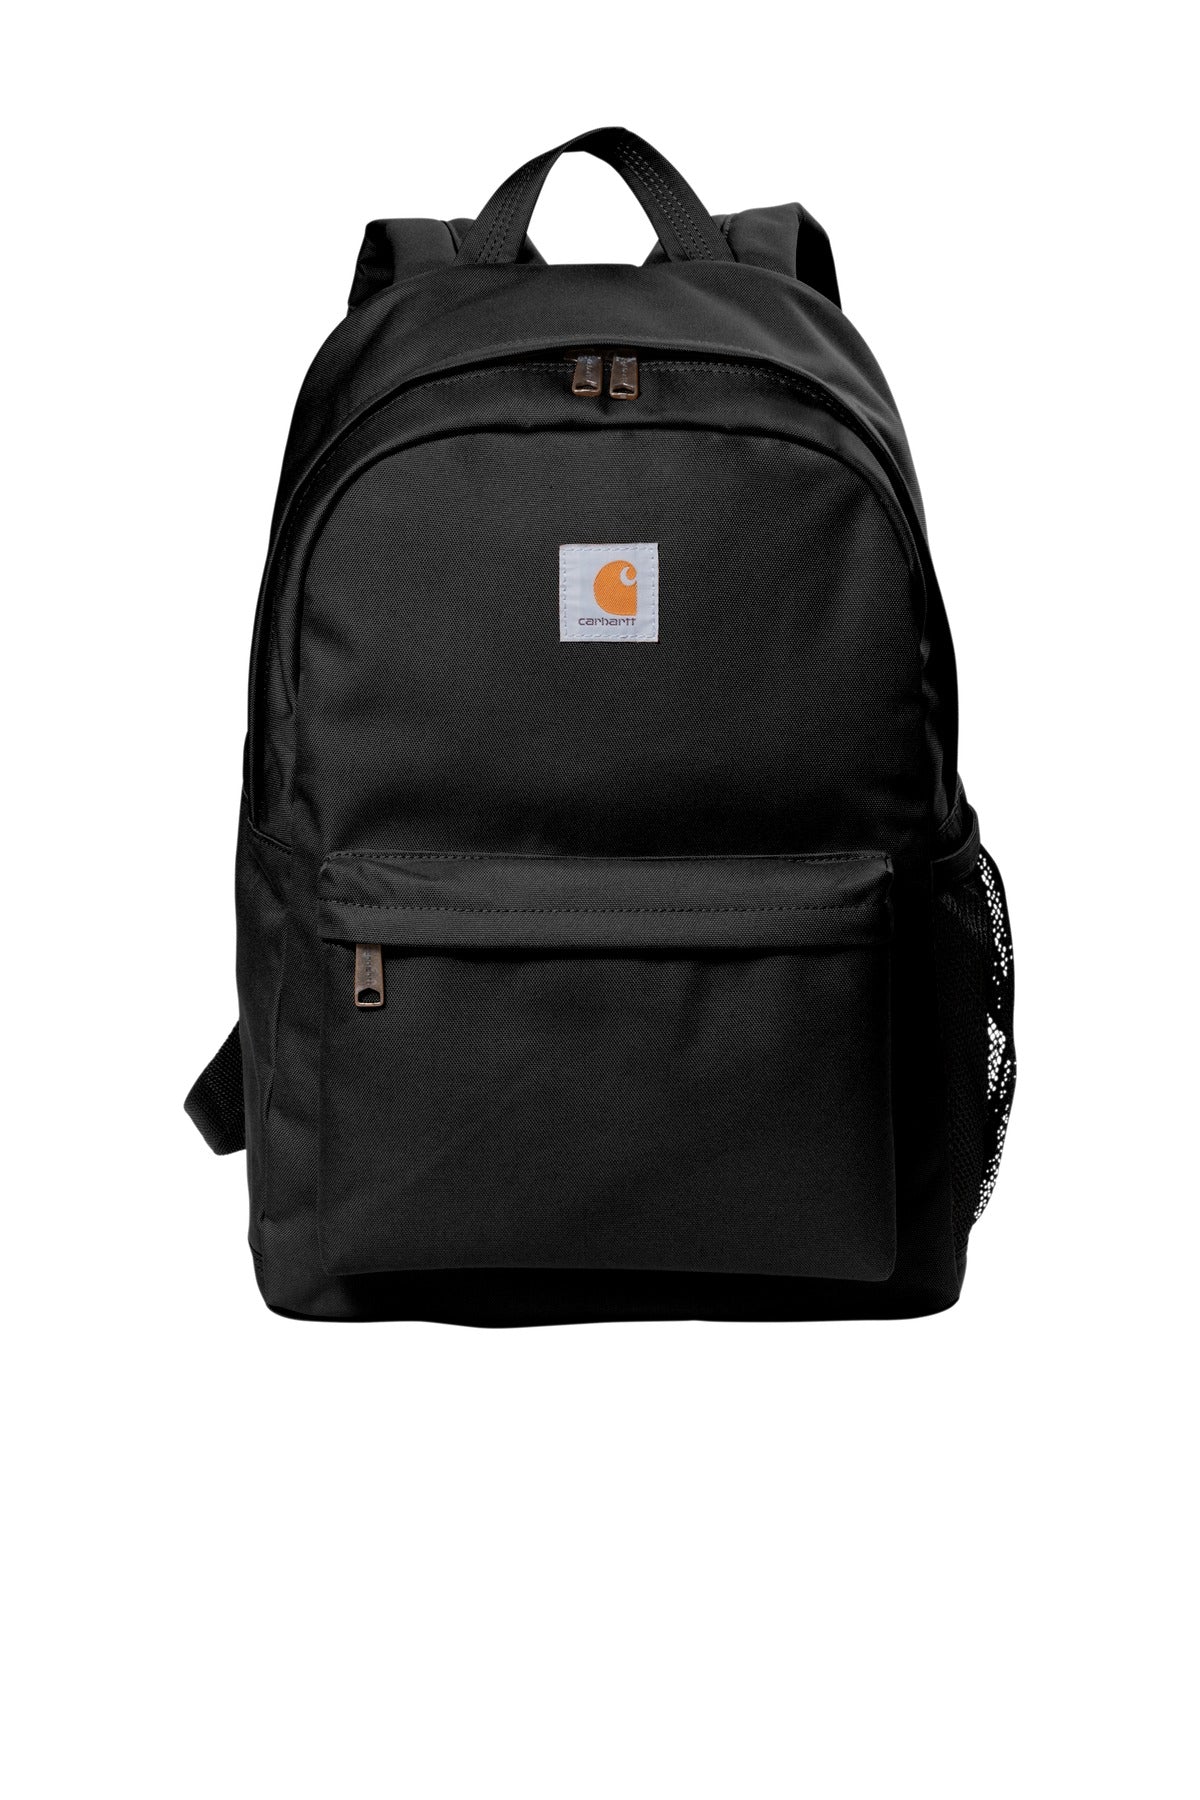 Carhartt® Canvas Backpack. CT89241804 - DFW Impression